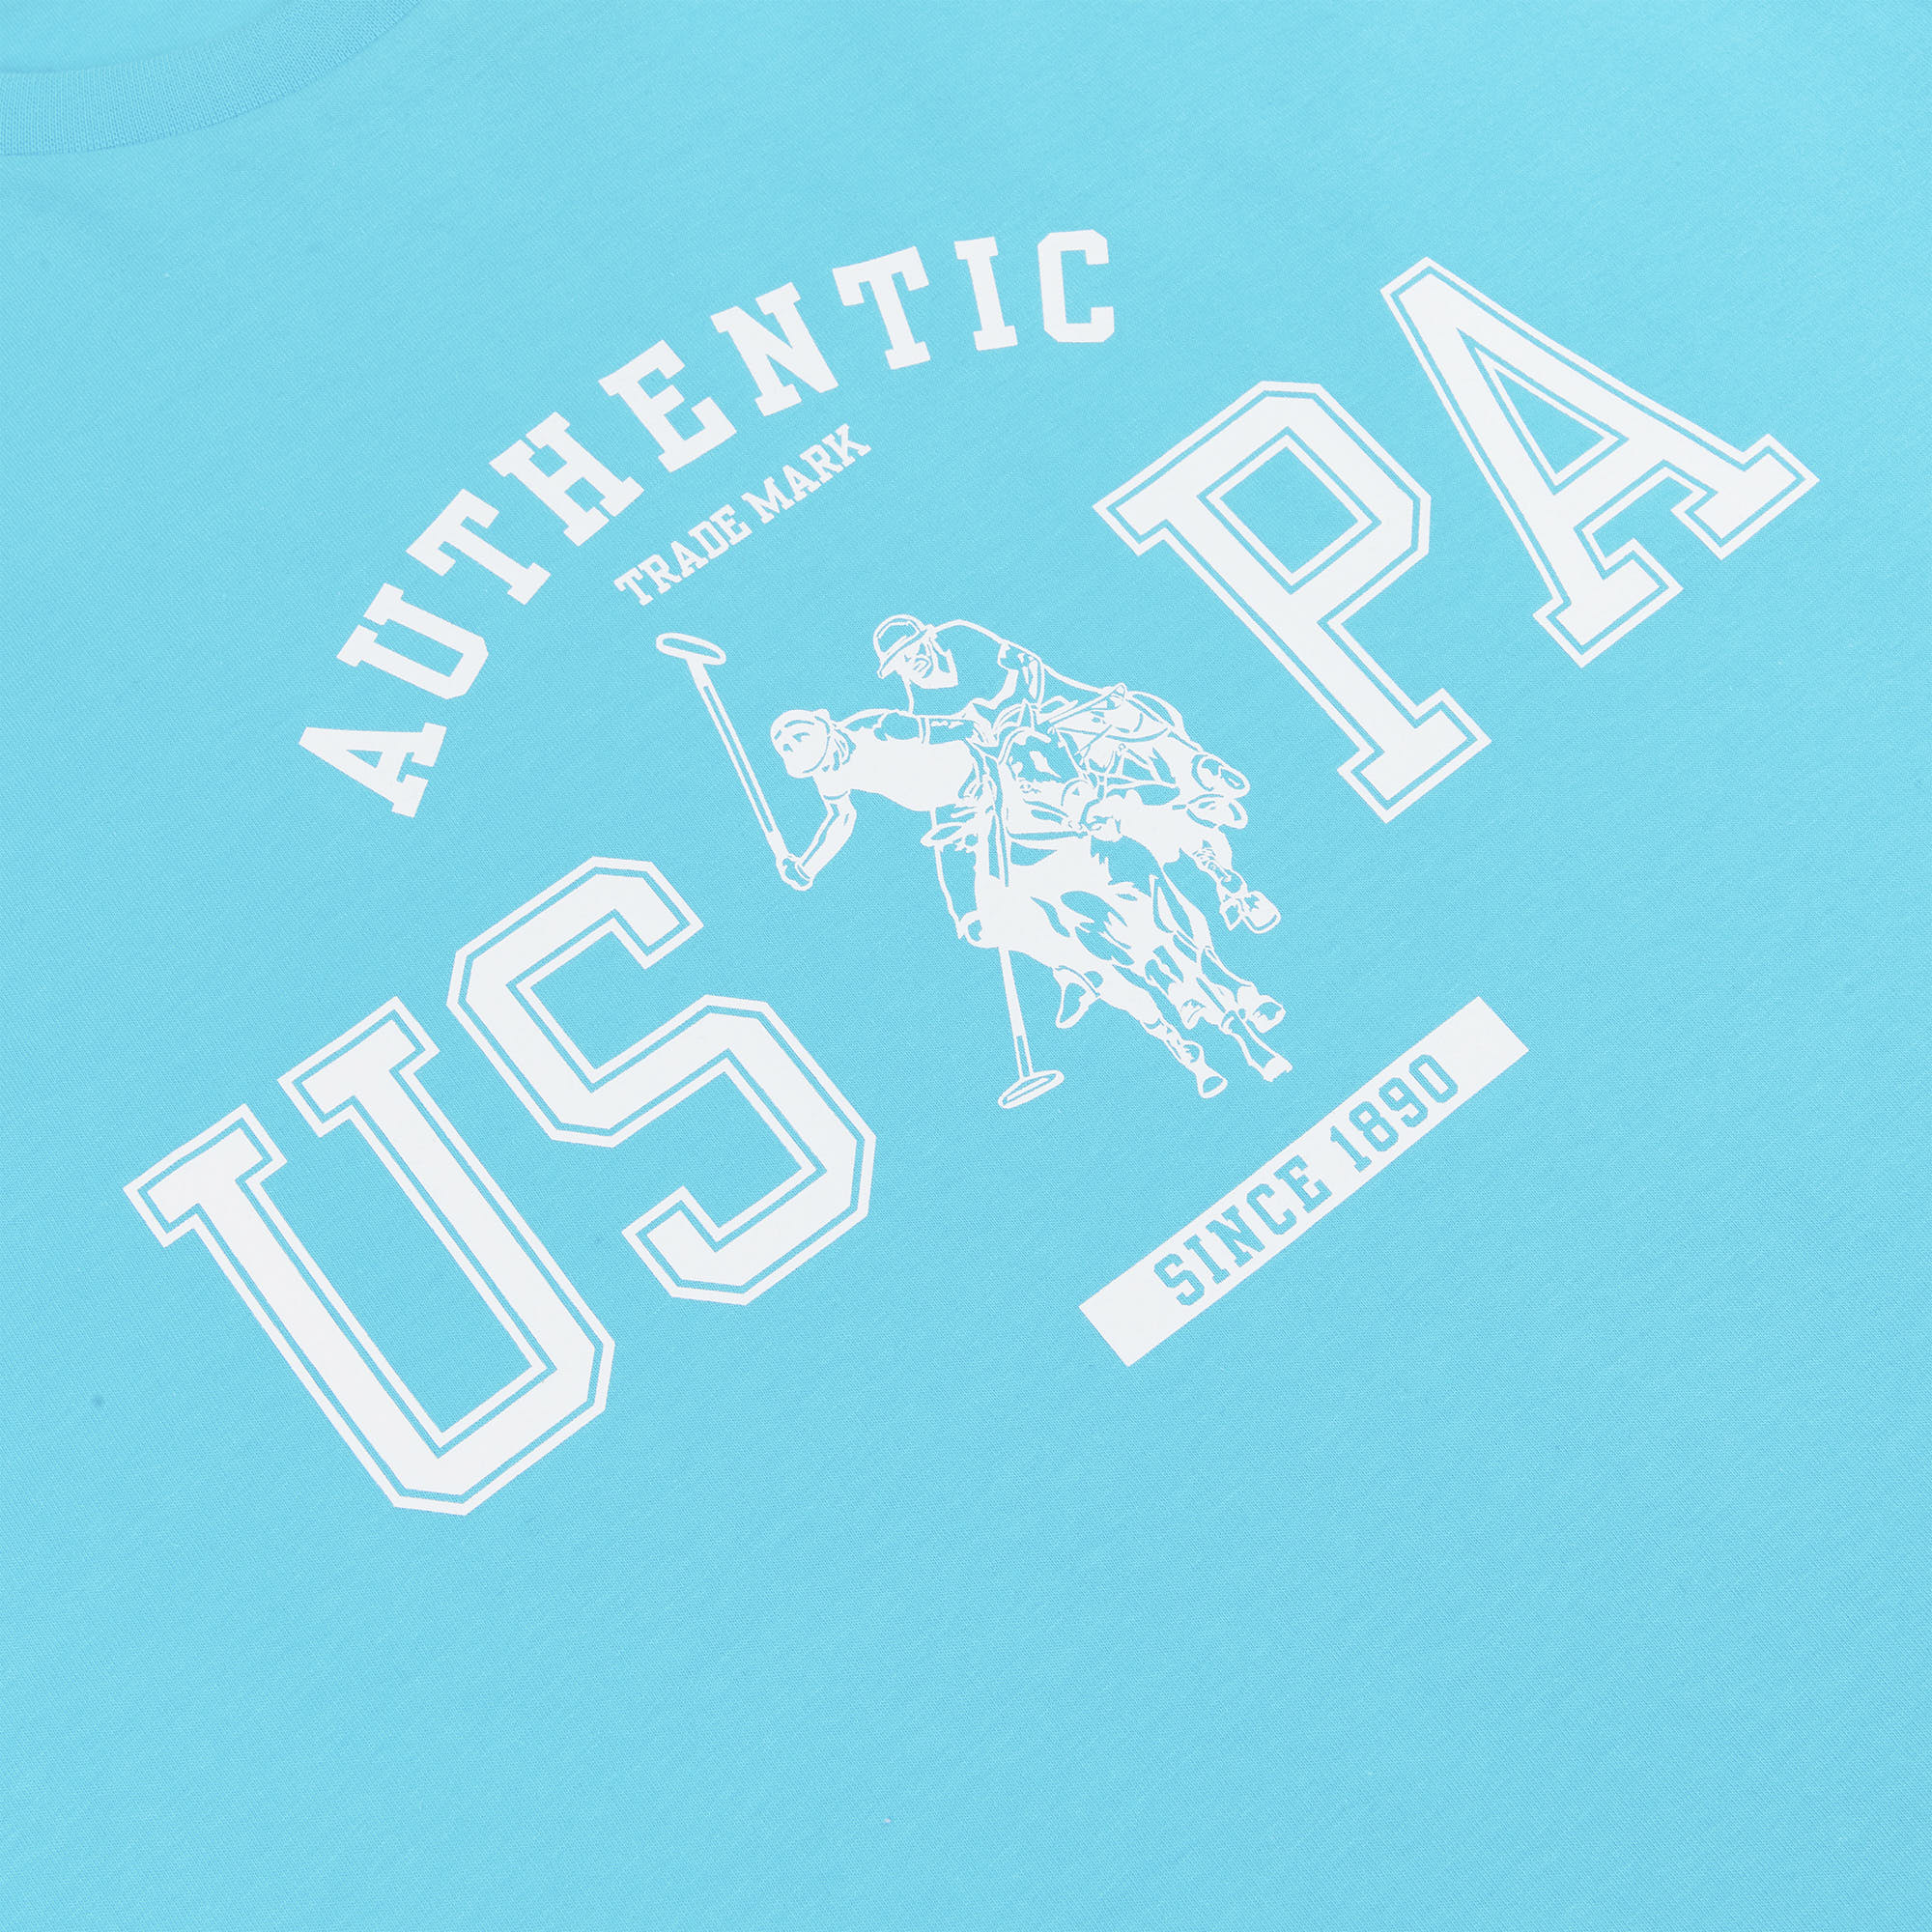 Mens Big & Tall Authentic USPA Graphic T-Shirt in Blue Atoll